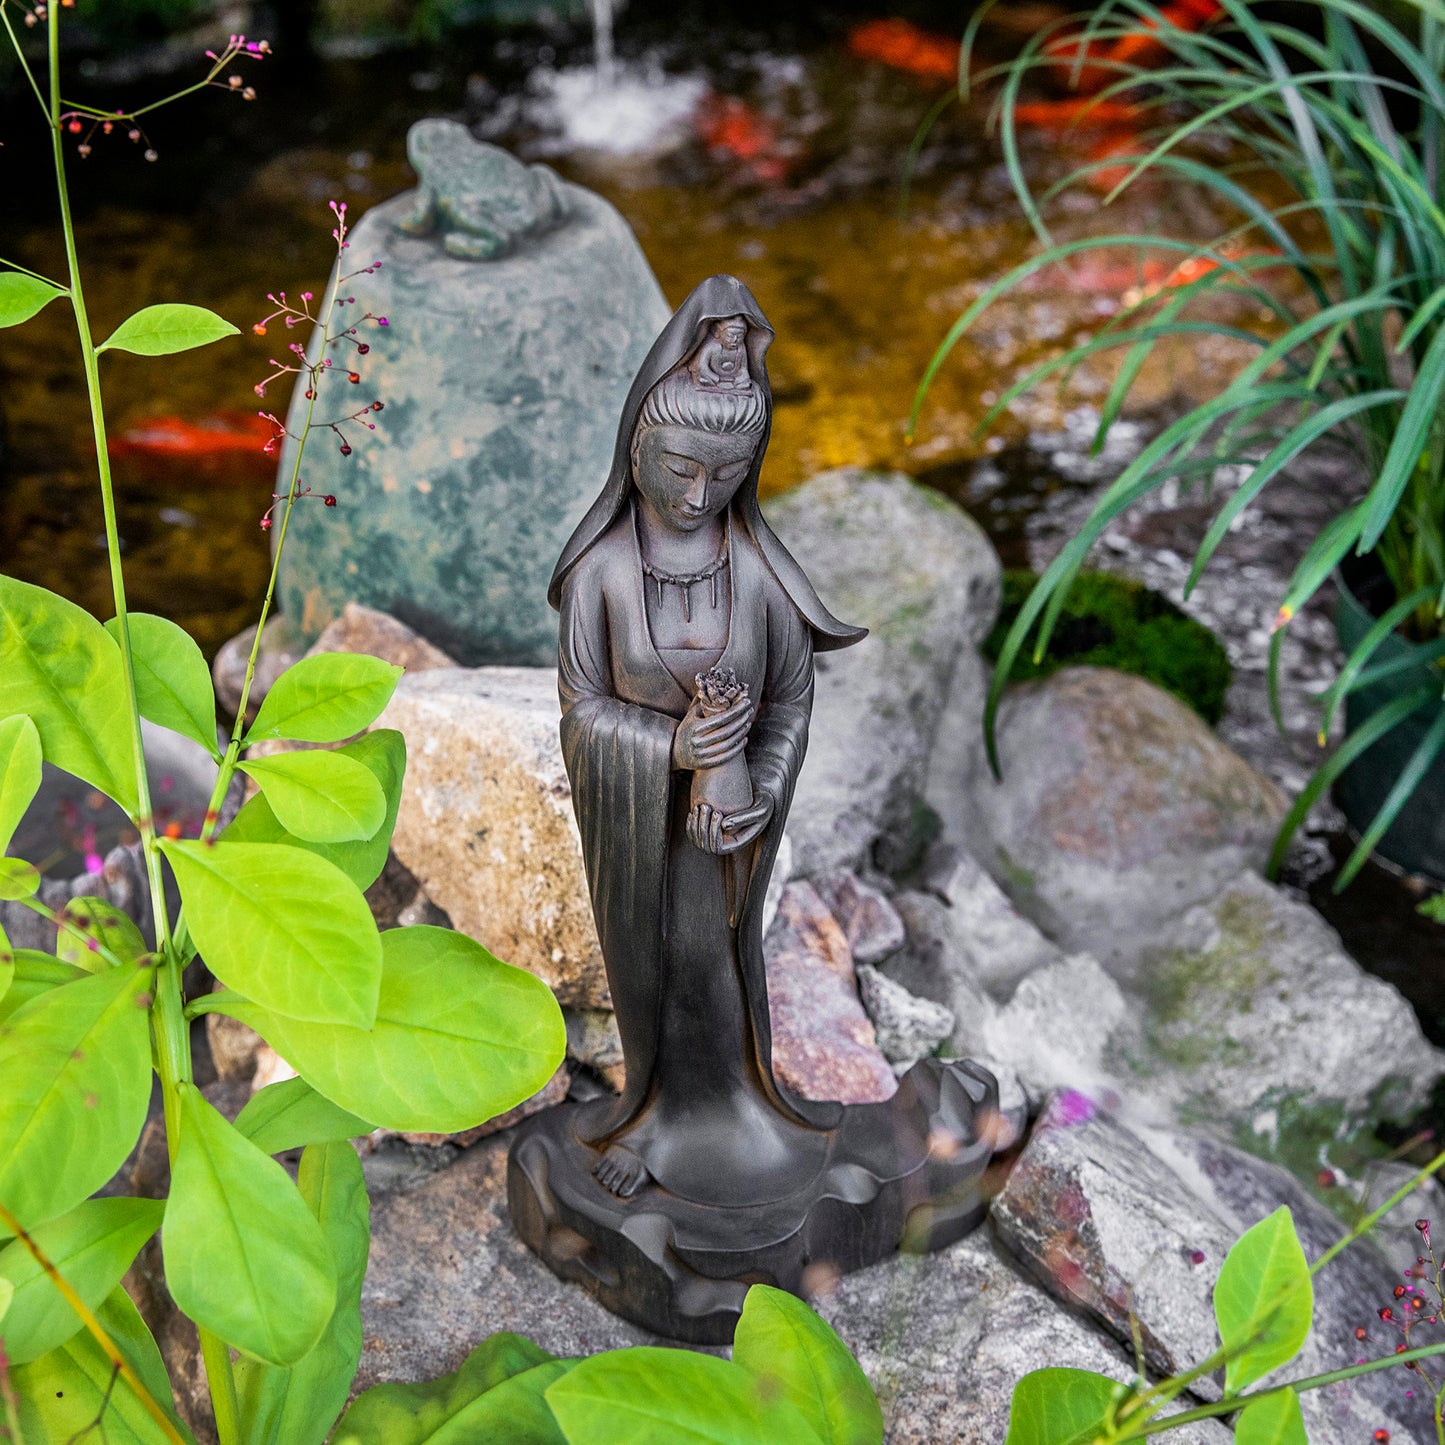 Kuan Yin with Vessel and Lotus Statue